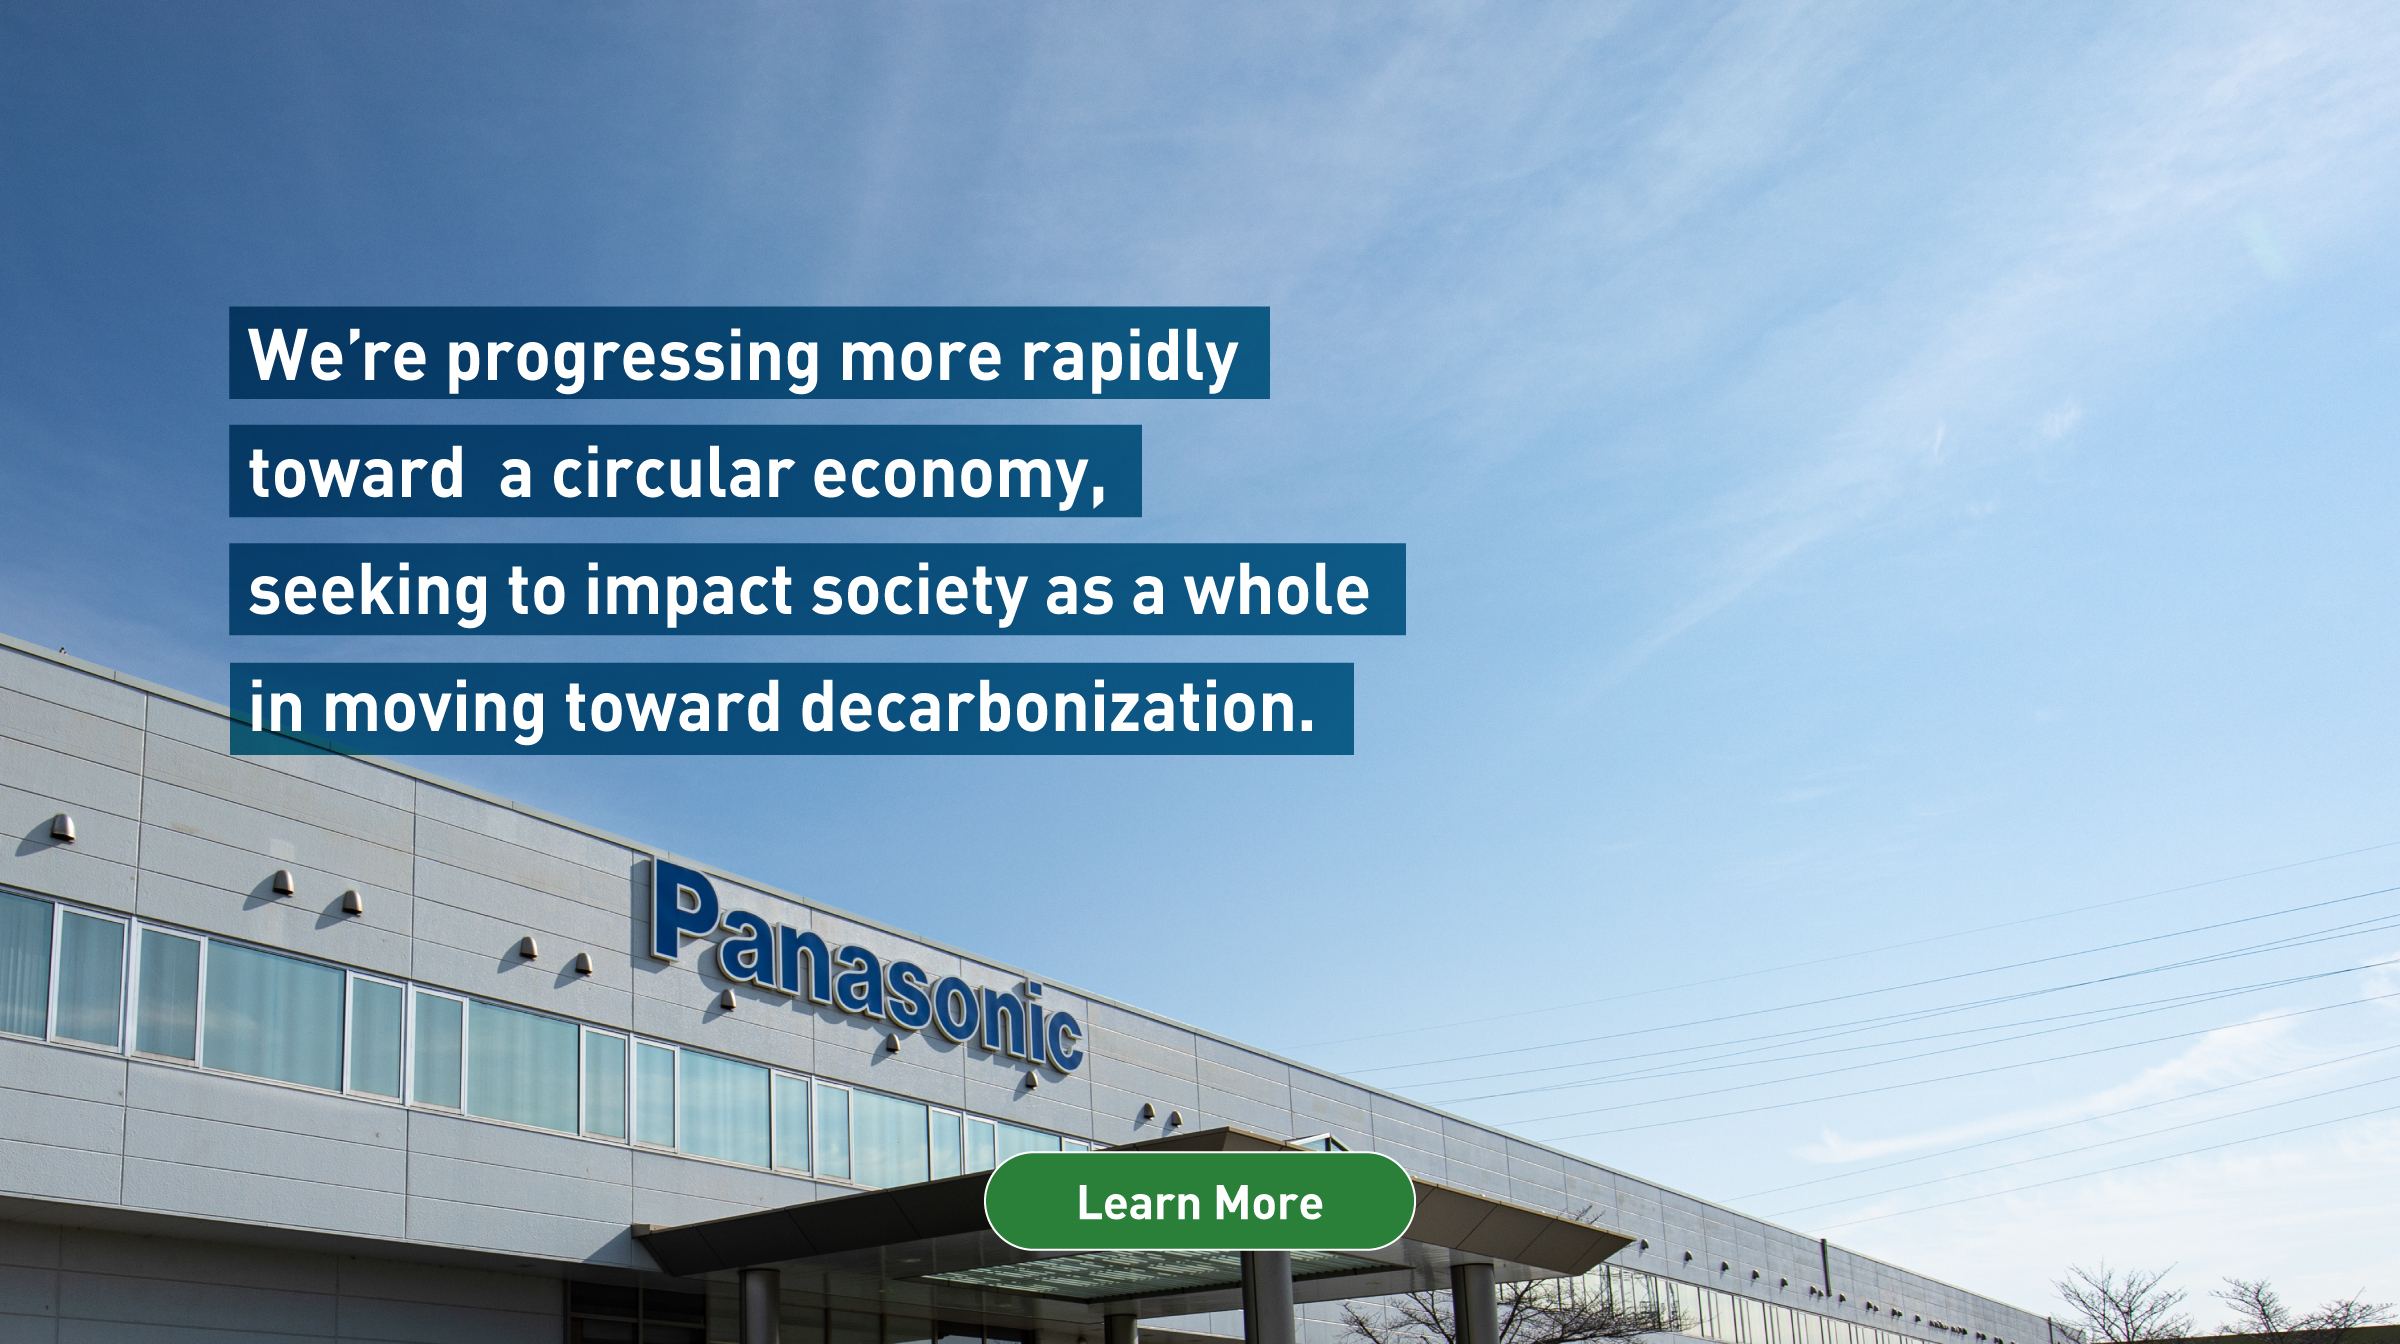 We’re progressing more rapidly toward a circular economy, seeking to impact society as a whole in moving toward decarbonization. Background photo: Entrance of Panasonic headquarters. Learn more.